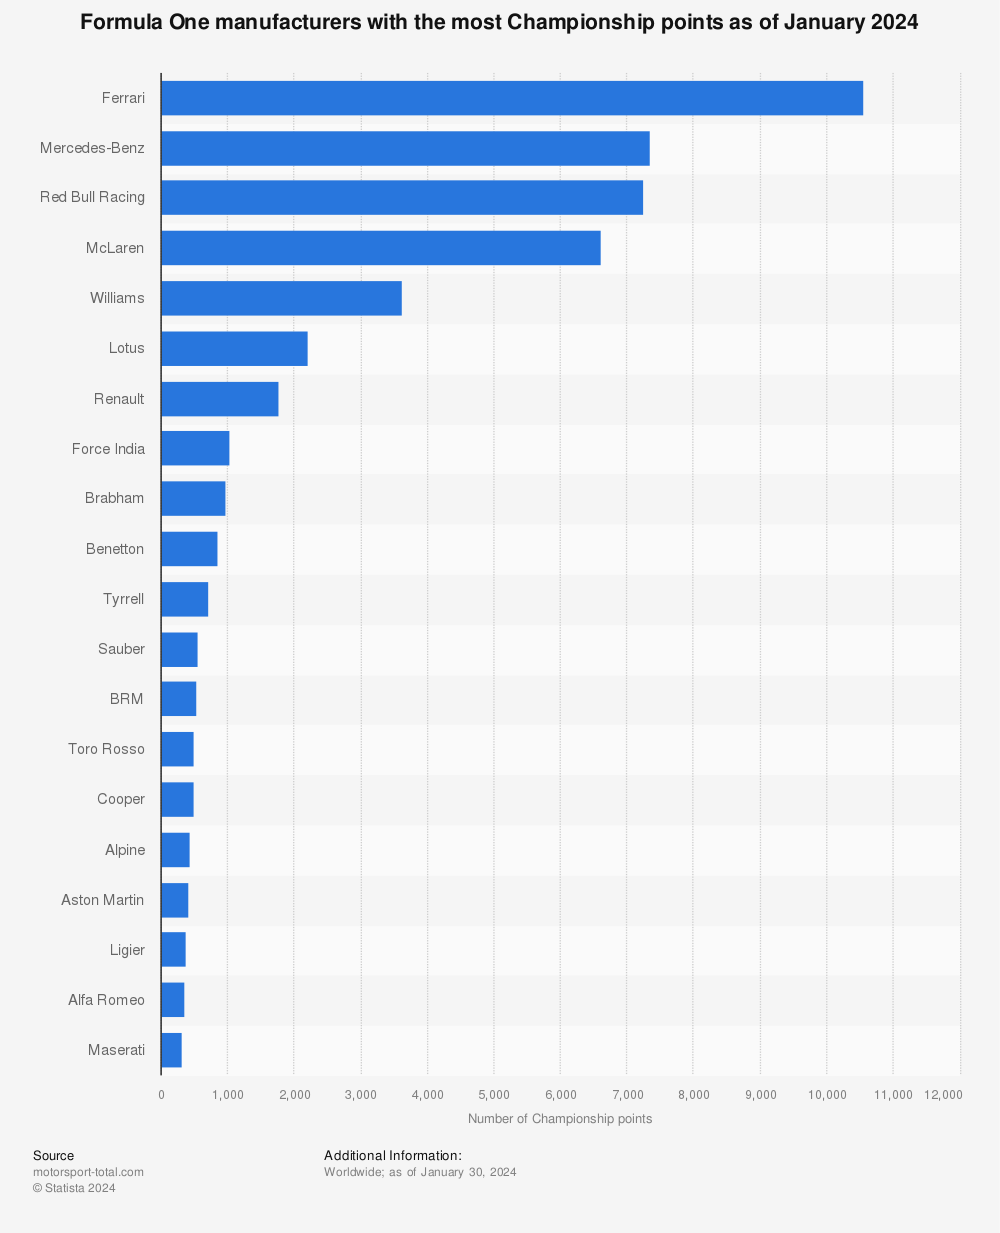 Statistic: Top Formula 1 manufacturers (designers) based on the number of championship points from 1950 to 2021* (in thousands) | Statista